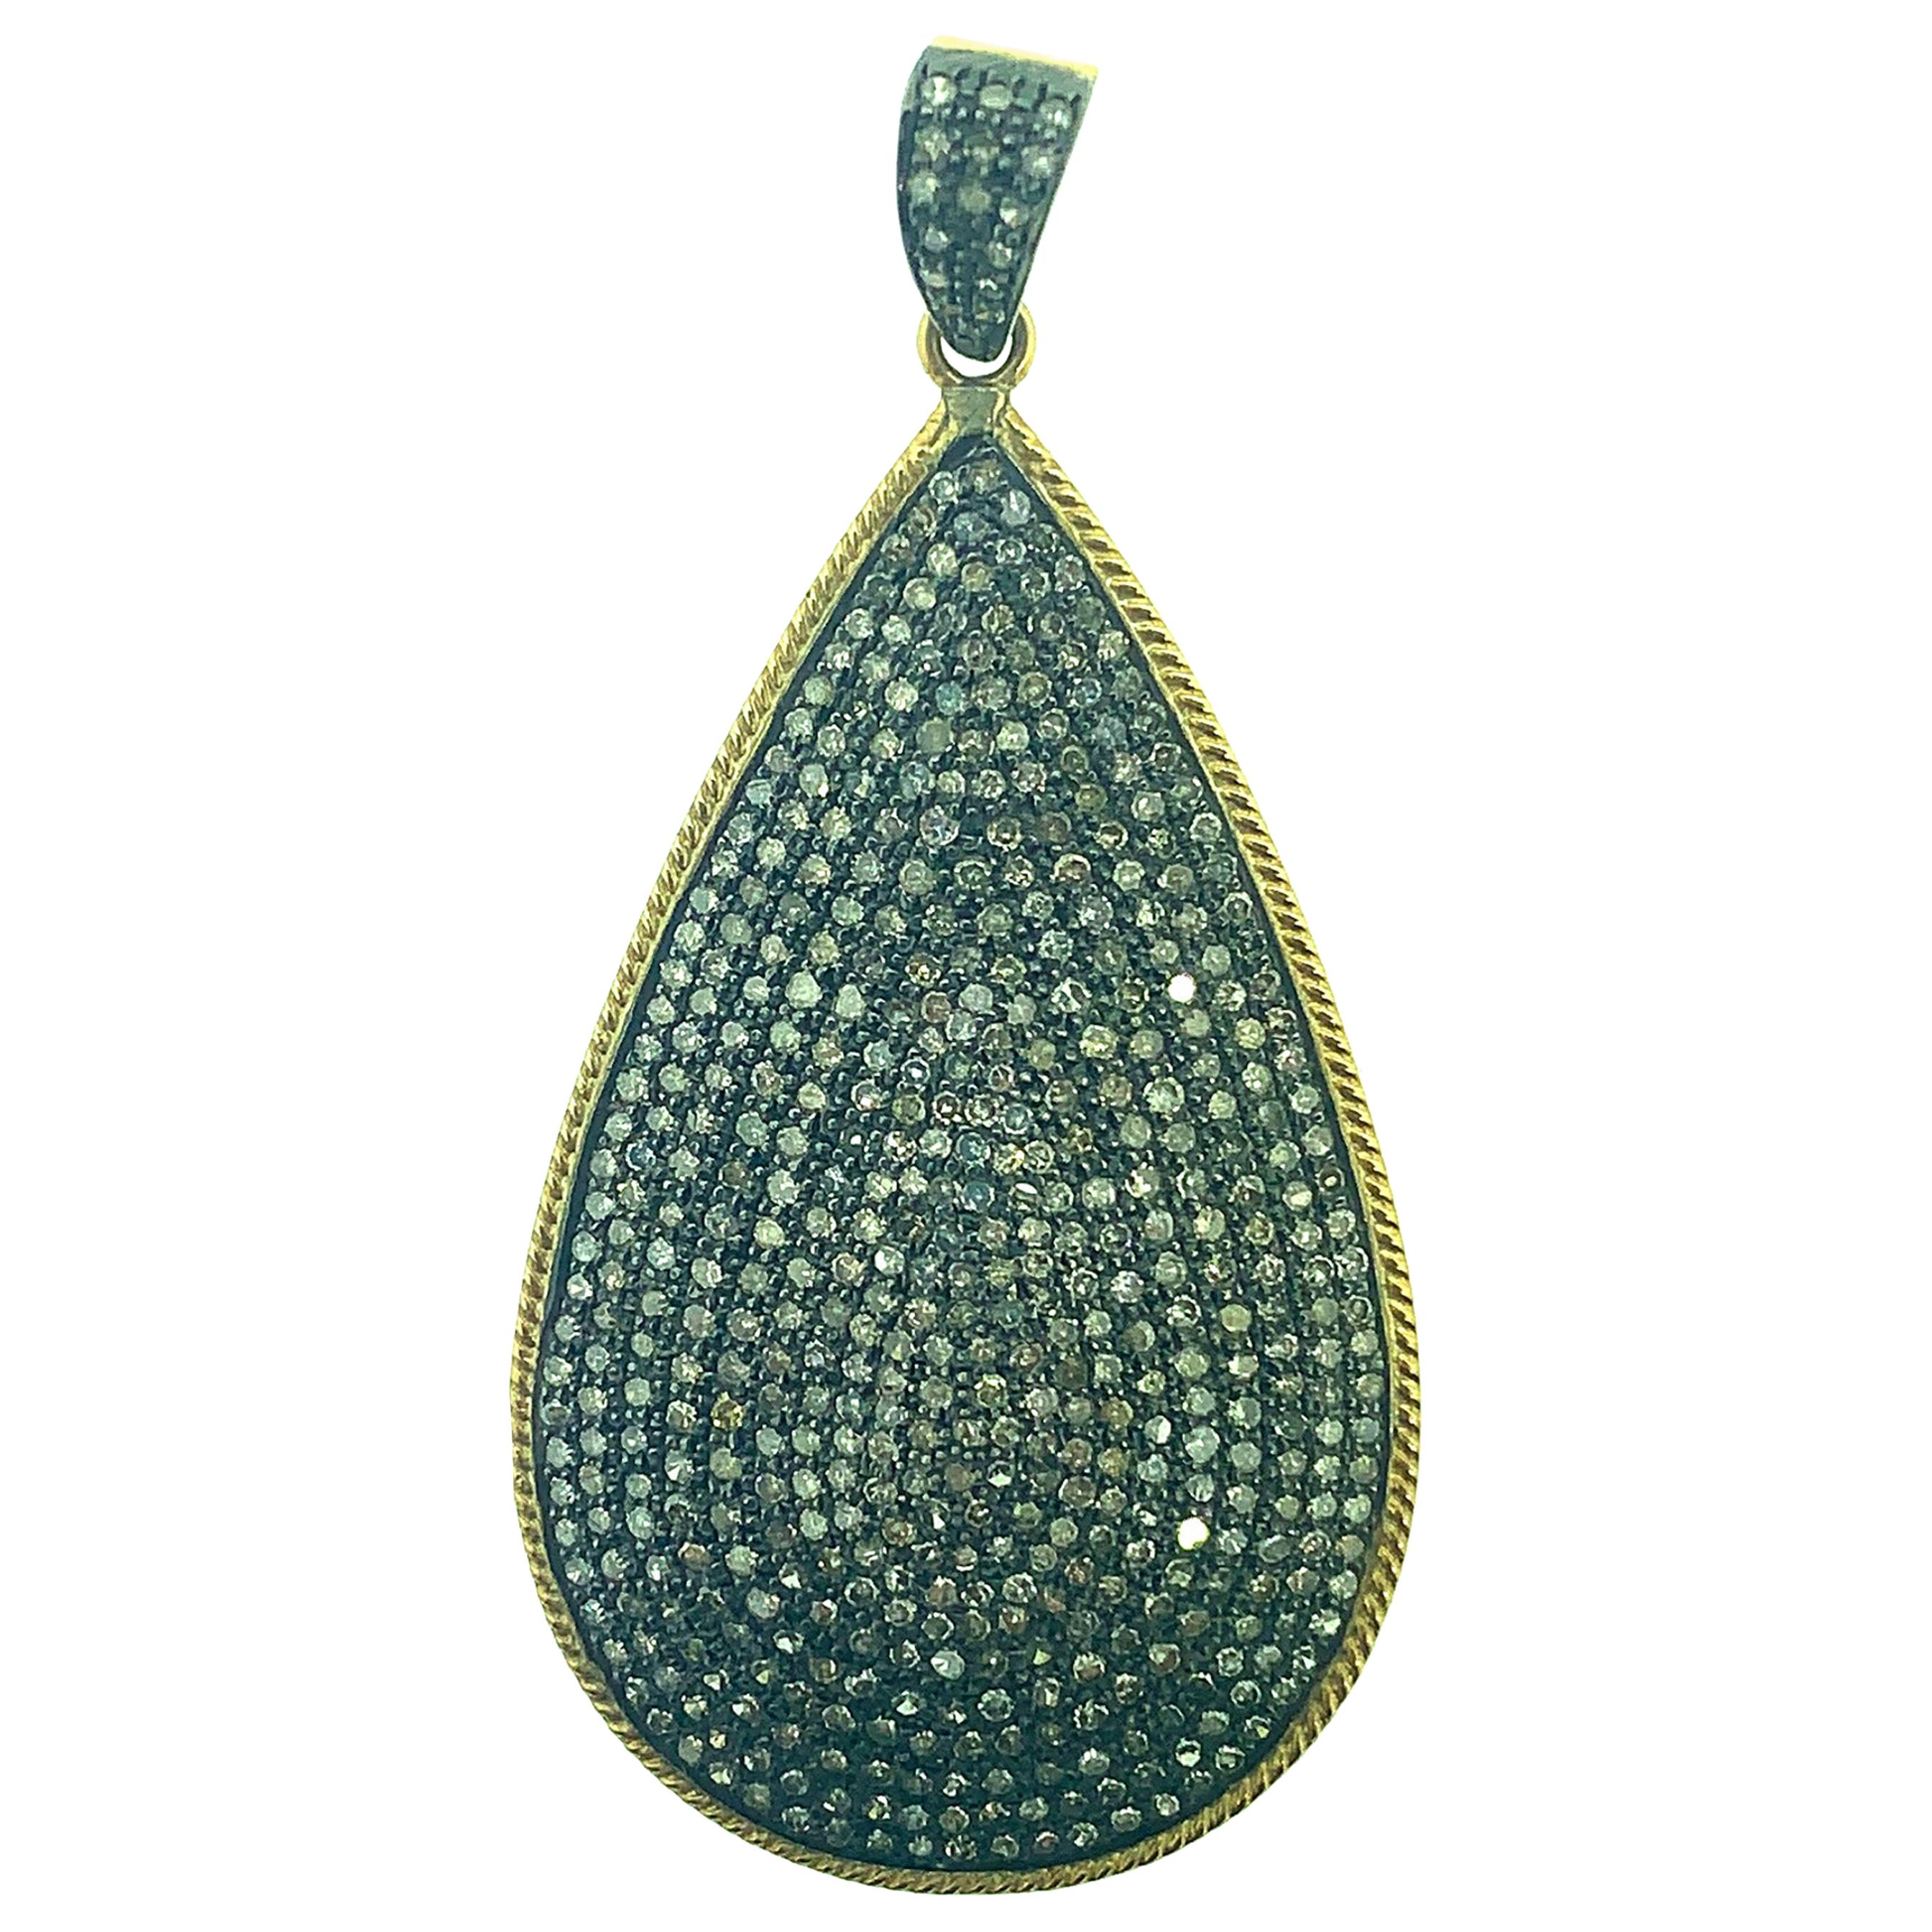 5.40 Carat Pave Diamond Teardrop Pendant in Oxidized Sterling Silver, 14Kt Gold For Sale